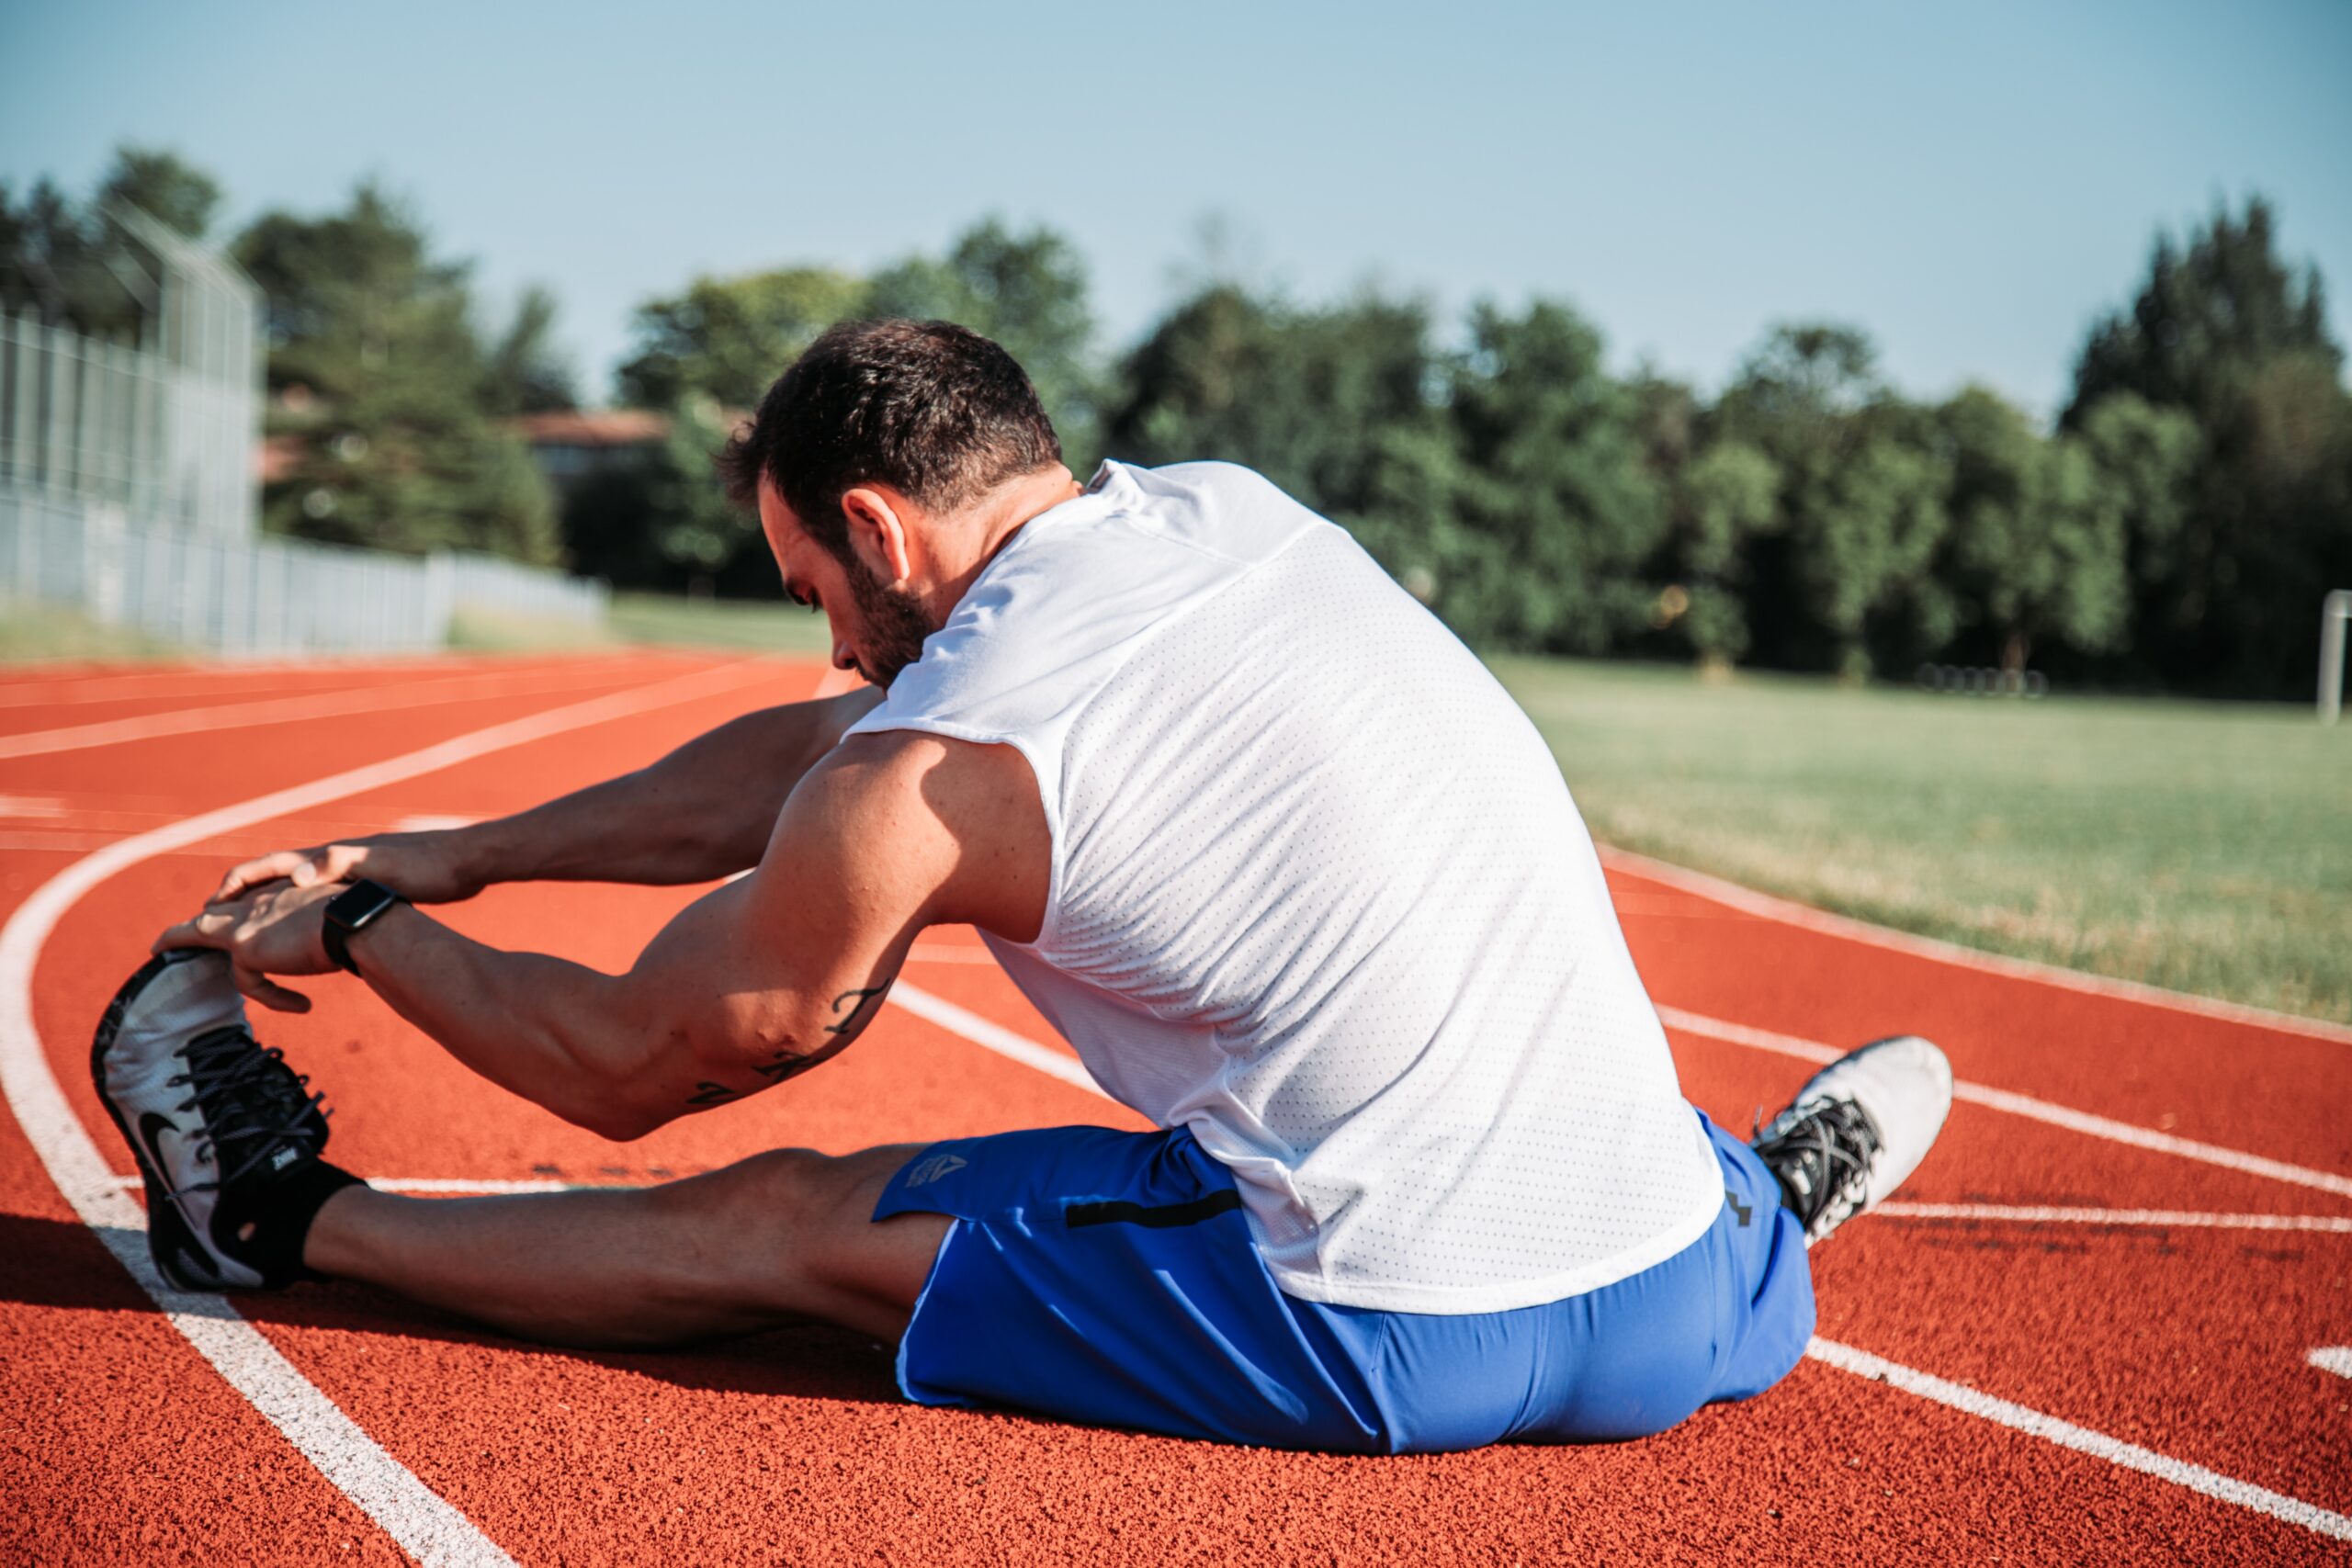 10 Points You Should Learn About Stretching